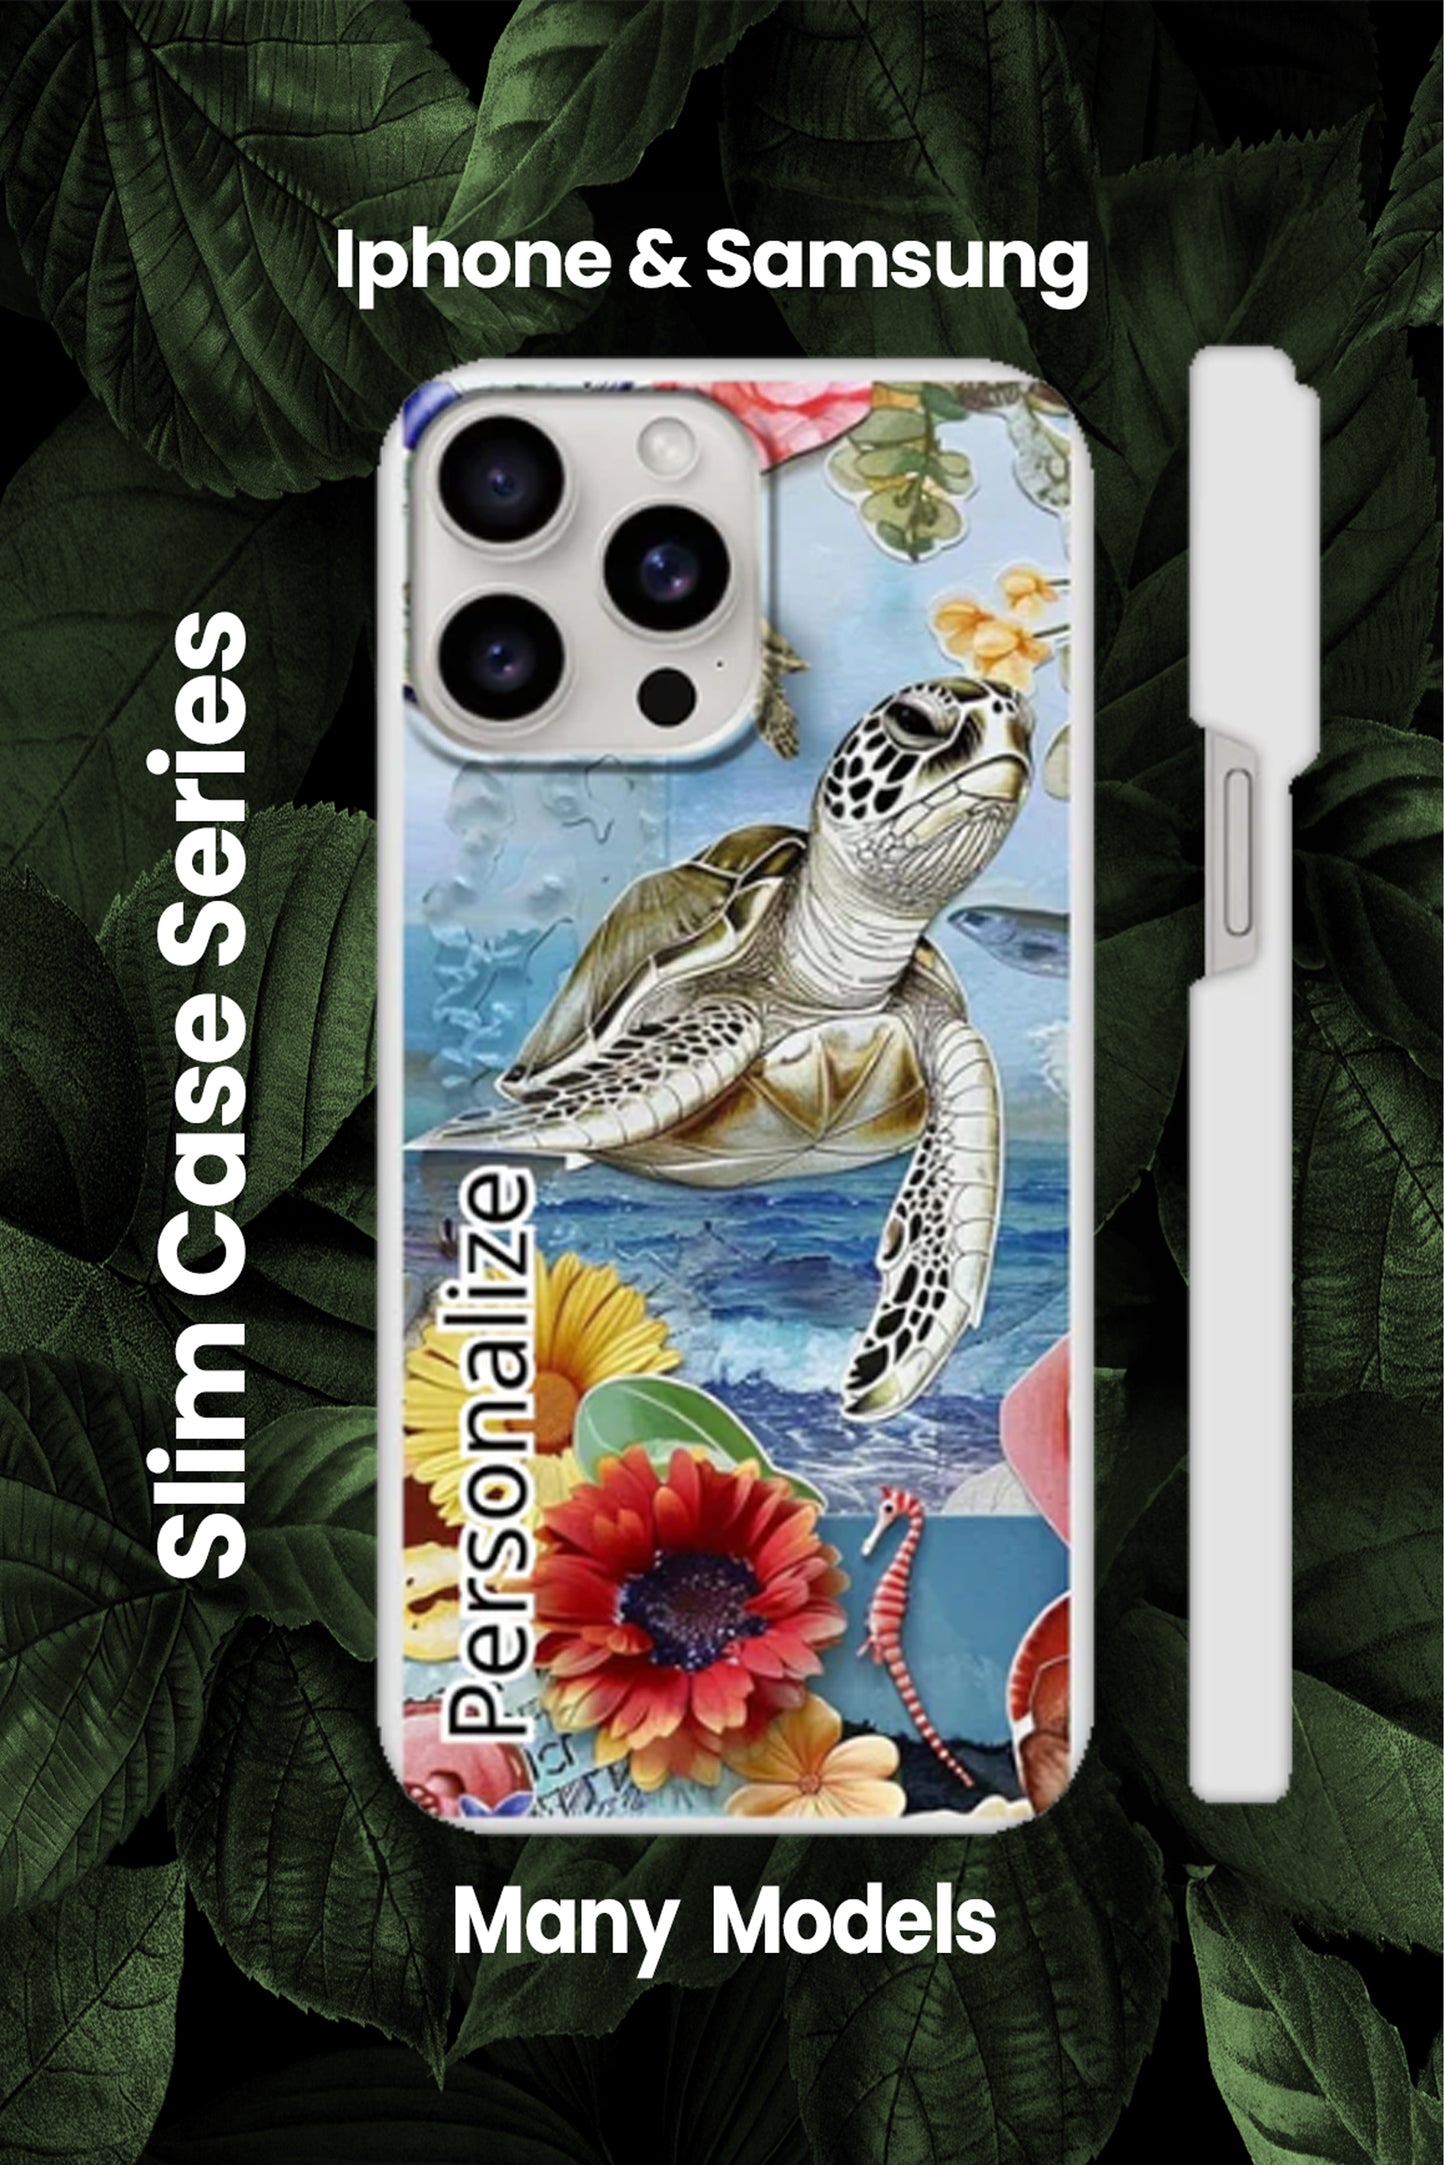 Slim Sea Turtle Phone Cases for most Iphone’s and Samsung's